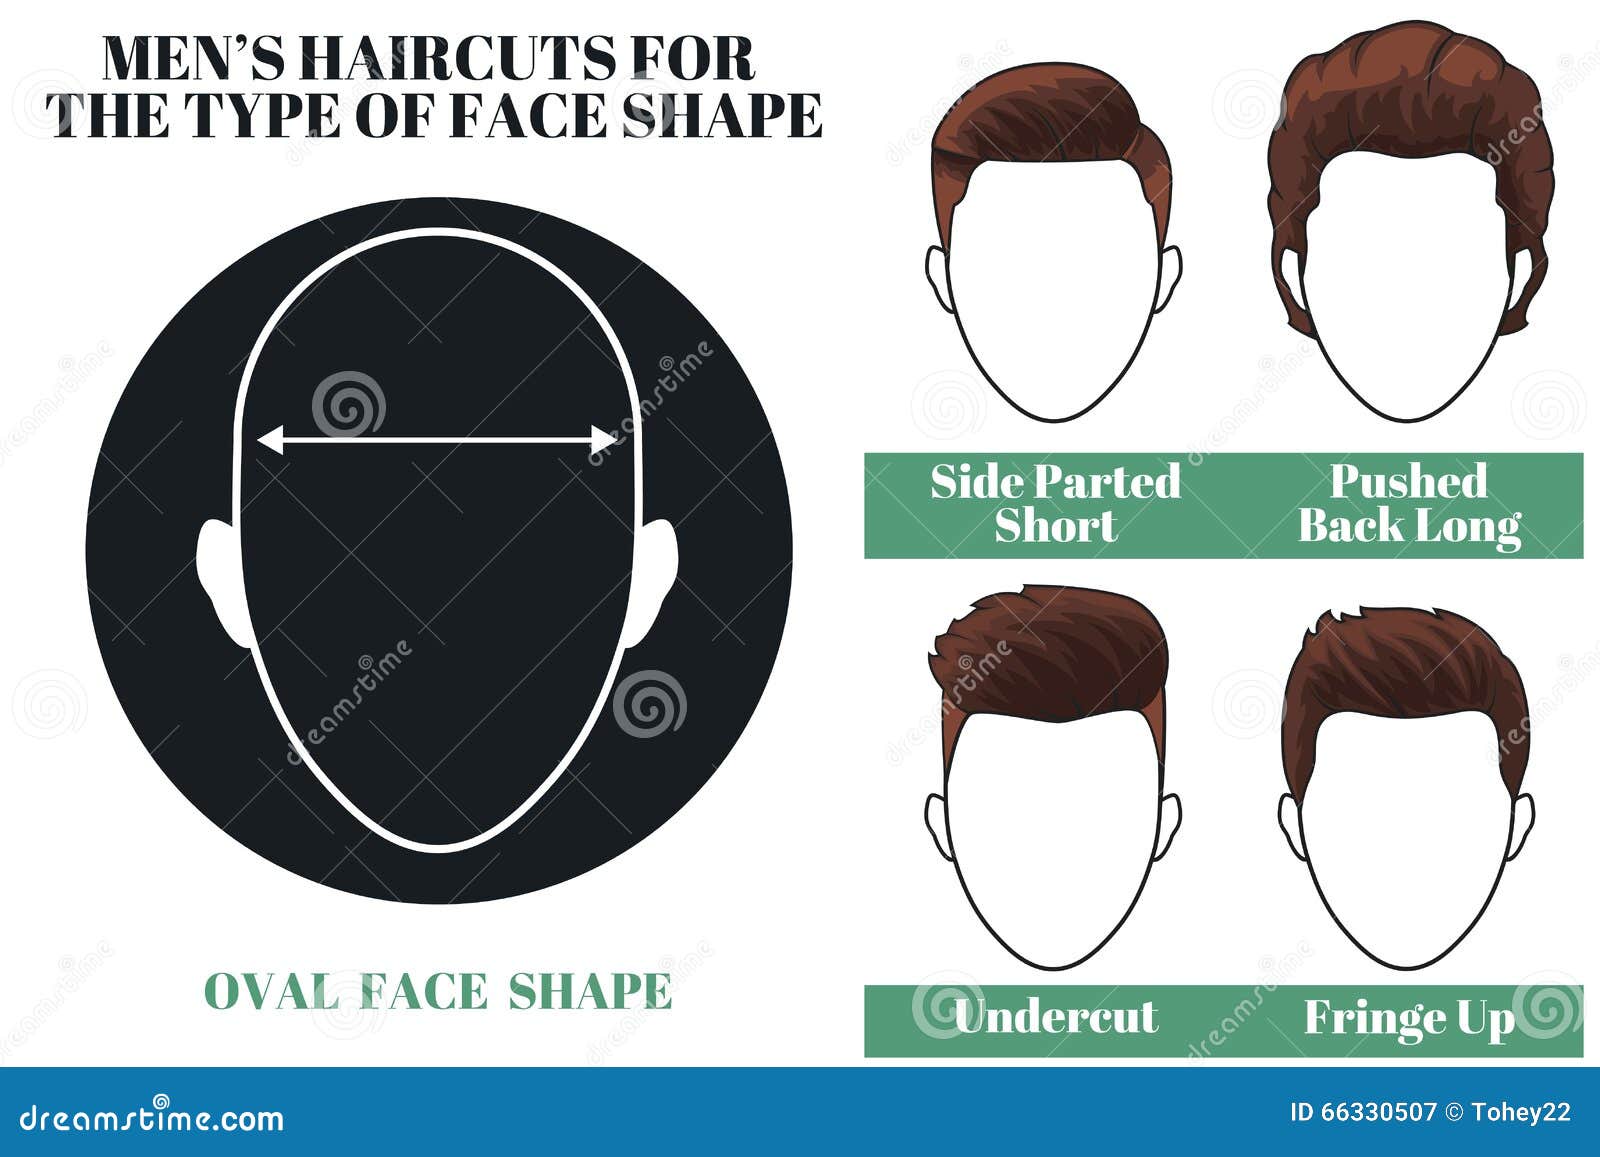 Oval Shape Face Hairstyle men  best hairstyle for men  oval face  hairstyles for men shorts  YouTube